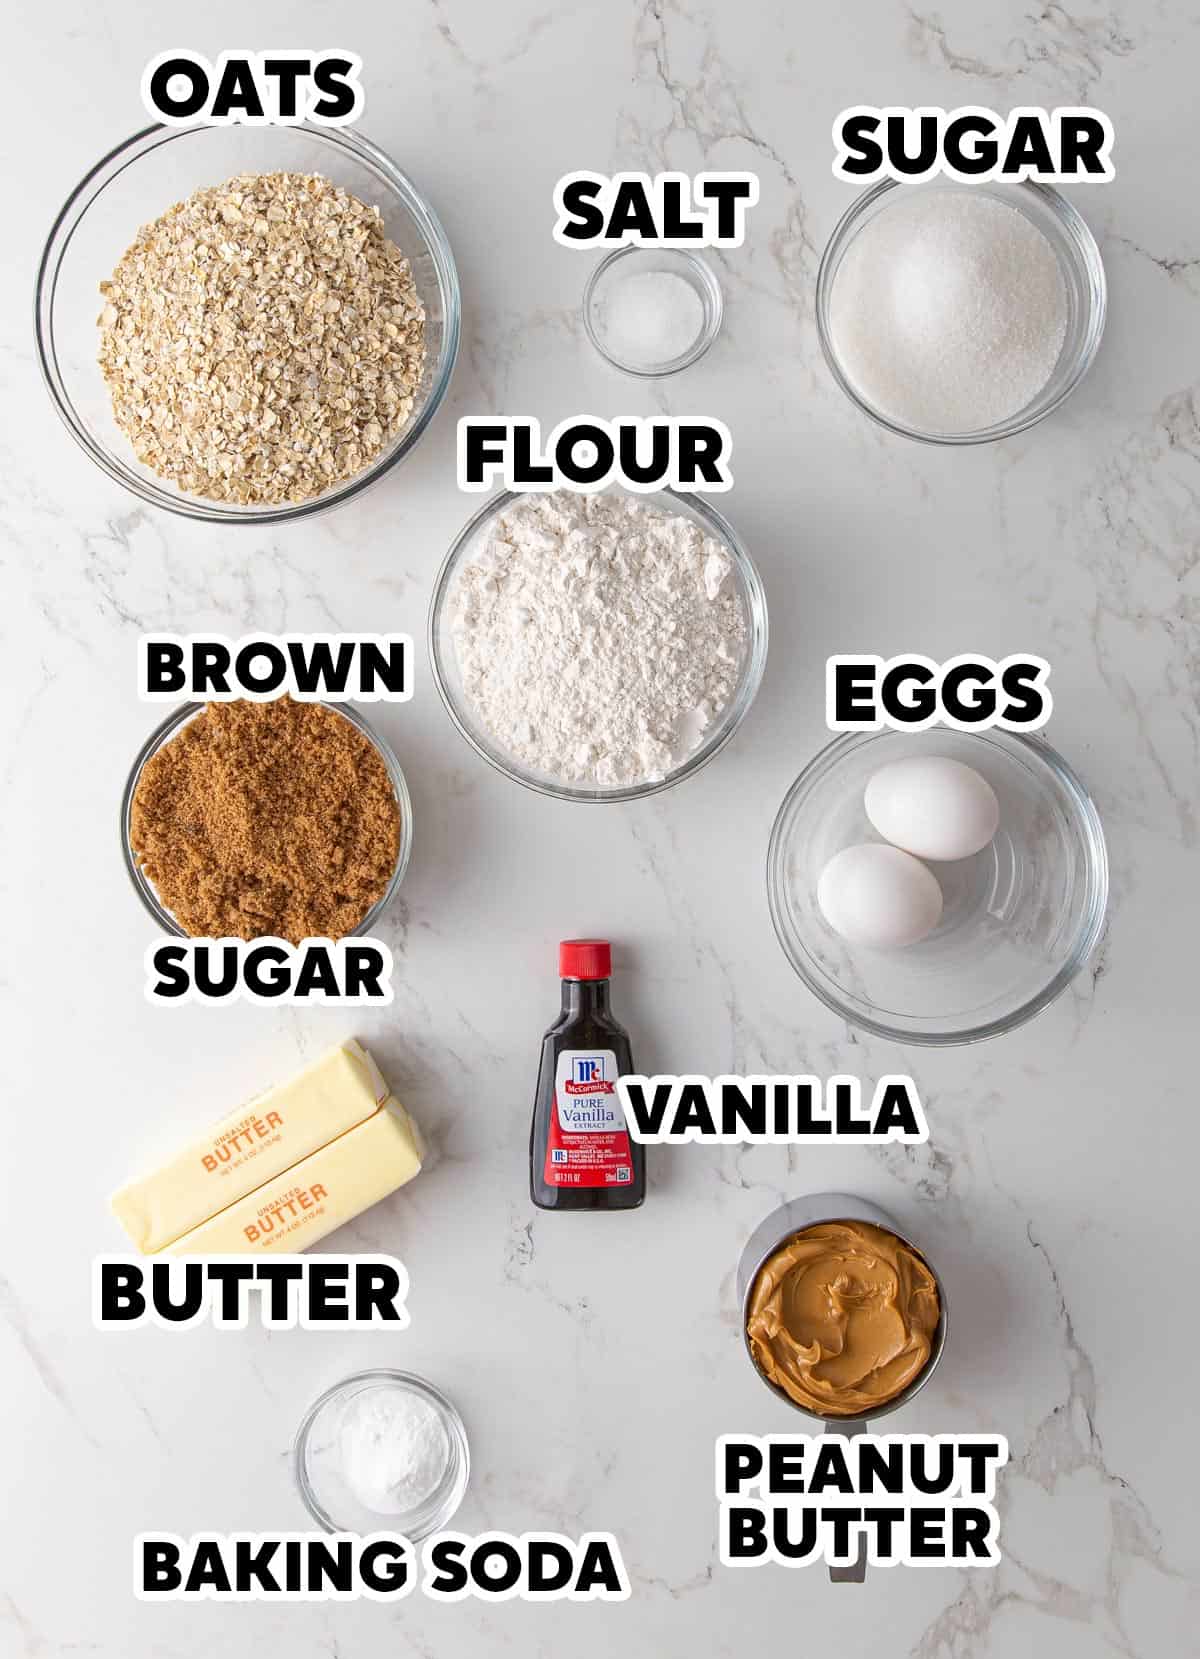 Overhead view of ingredients for oatmeal peanut butter cookies with overlay text.